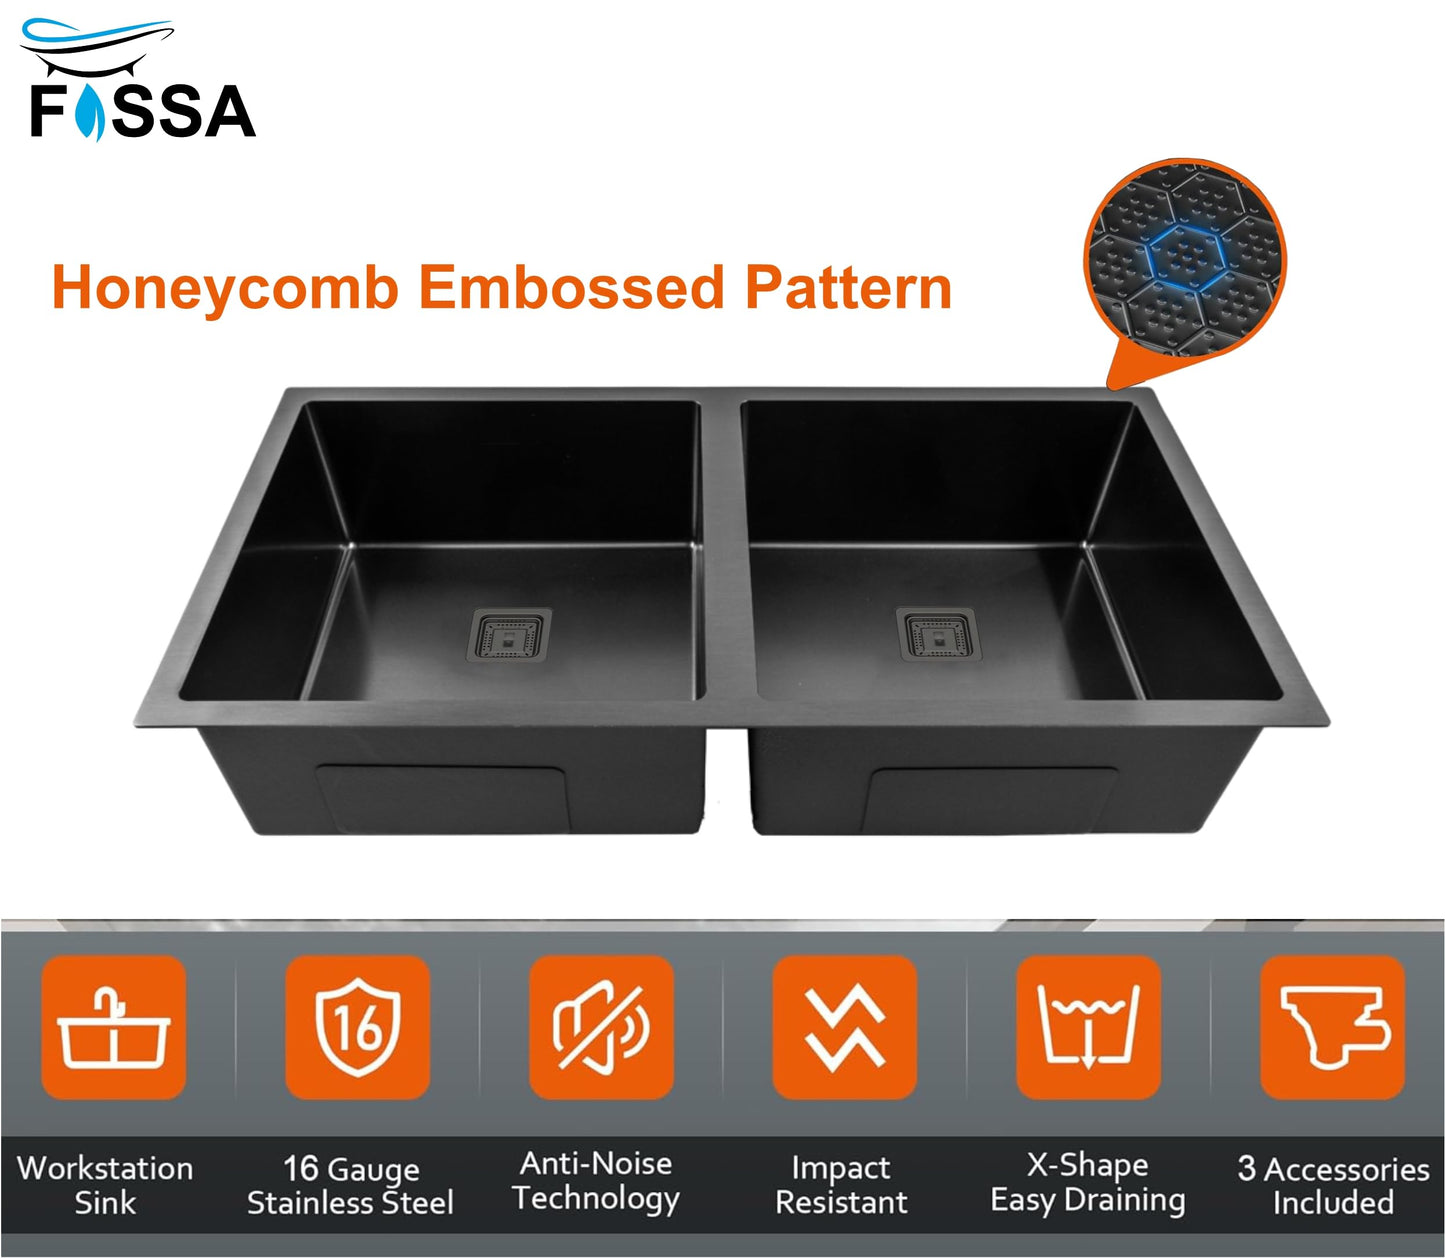 Fossa 37"x18"x10" Double Bowl Handmade Kitchen Sink Honeycomb Embossed Sink with Black Nano Coating, Stainless Steel Sink, Rectangular Workstation with Drainer and Overflow Set (Black)